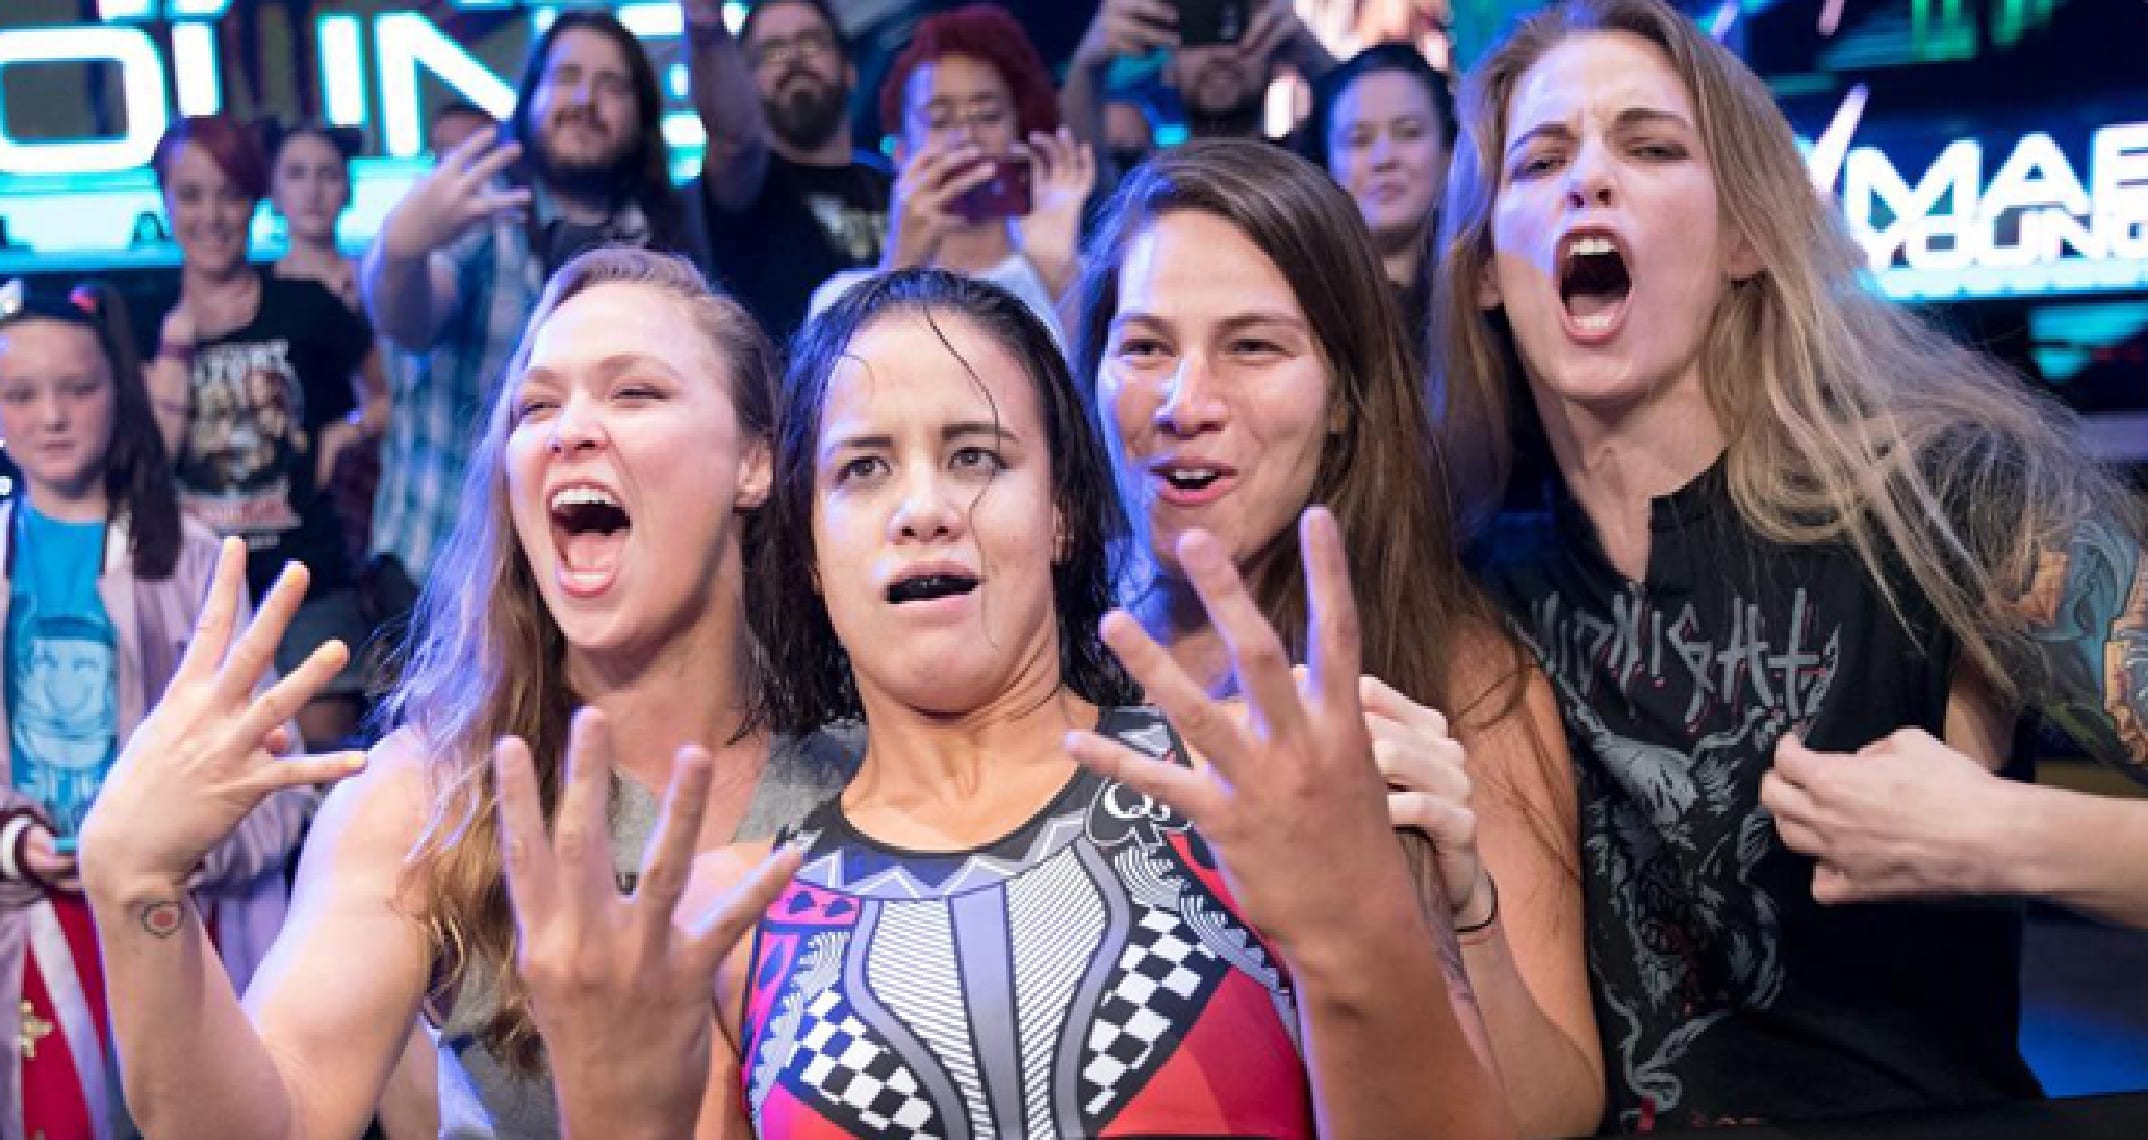 4 Horsewoman Set For In-Ring Debut Tonight